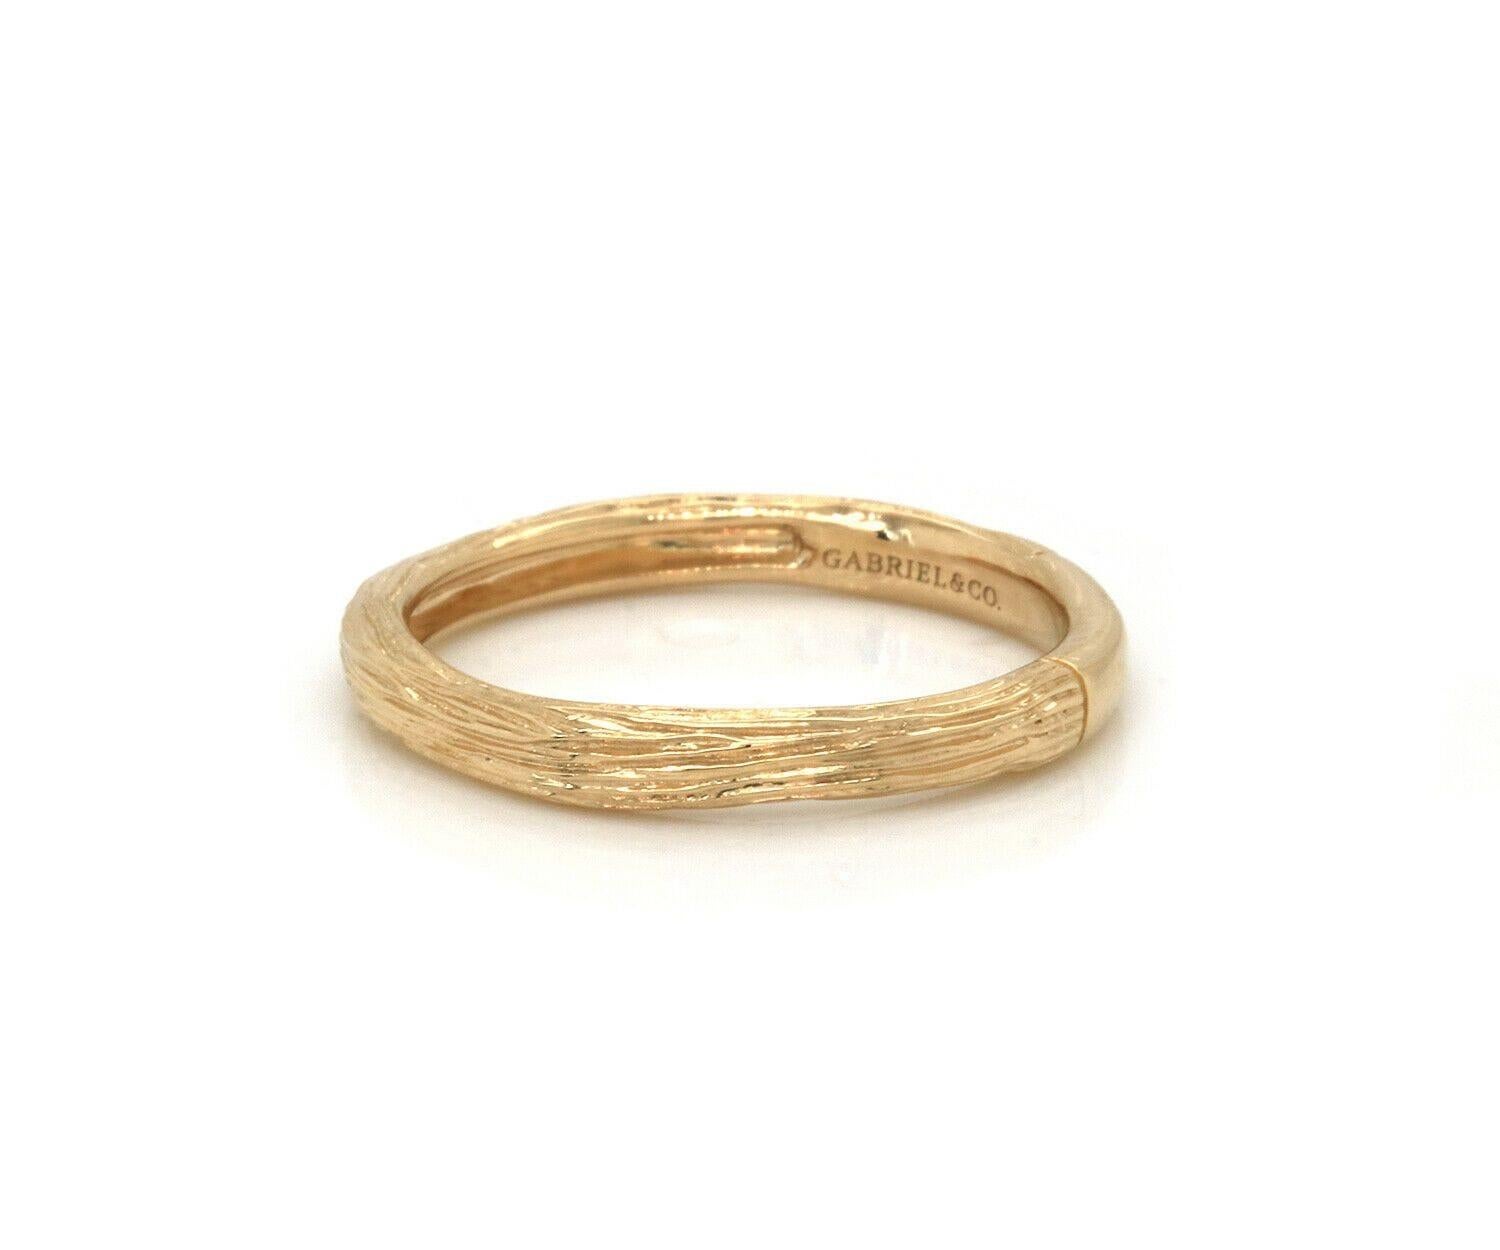 New Gabriel & Co. Textured Band Ring in 14K

Gabriel & Co. Textured Band Ring
14K Yellow Gold
Band Width: Approx. 2.50 MM
Ring Size: 6.50 (US)
Weight: Approx. 2.10 Grams
Stamped: GABRIEL & CO., 14K, S1279722

Condition:
Offered for your